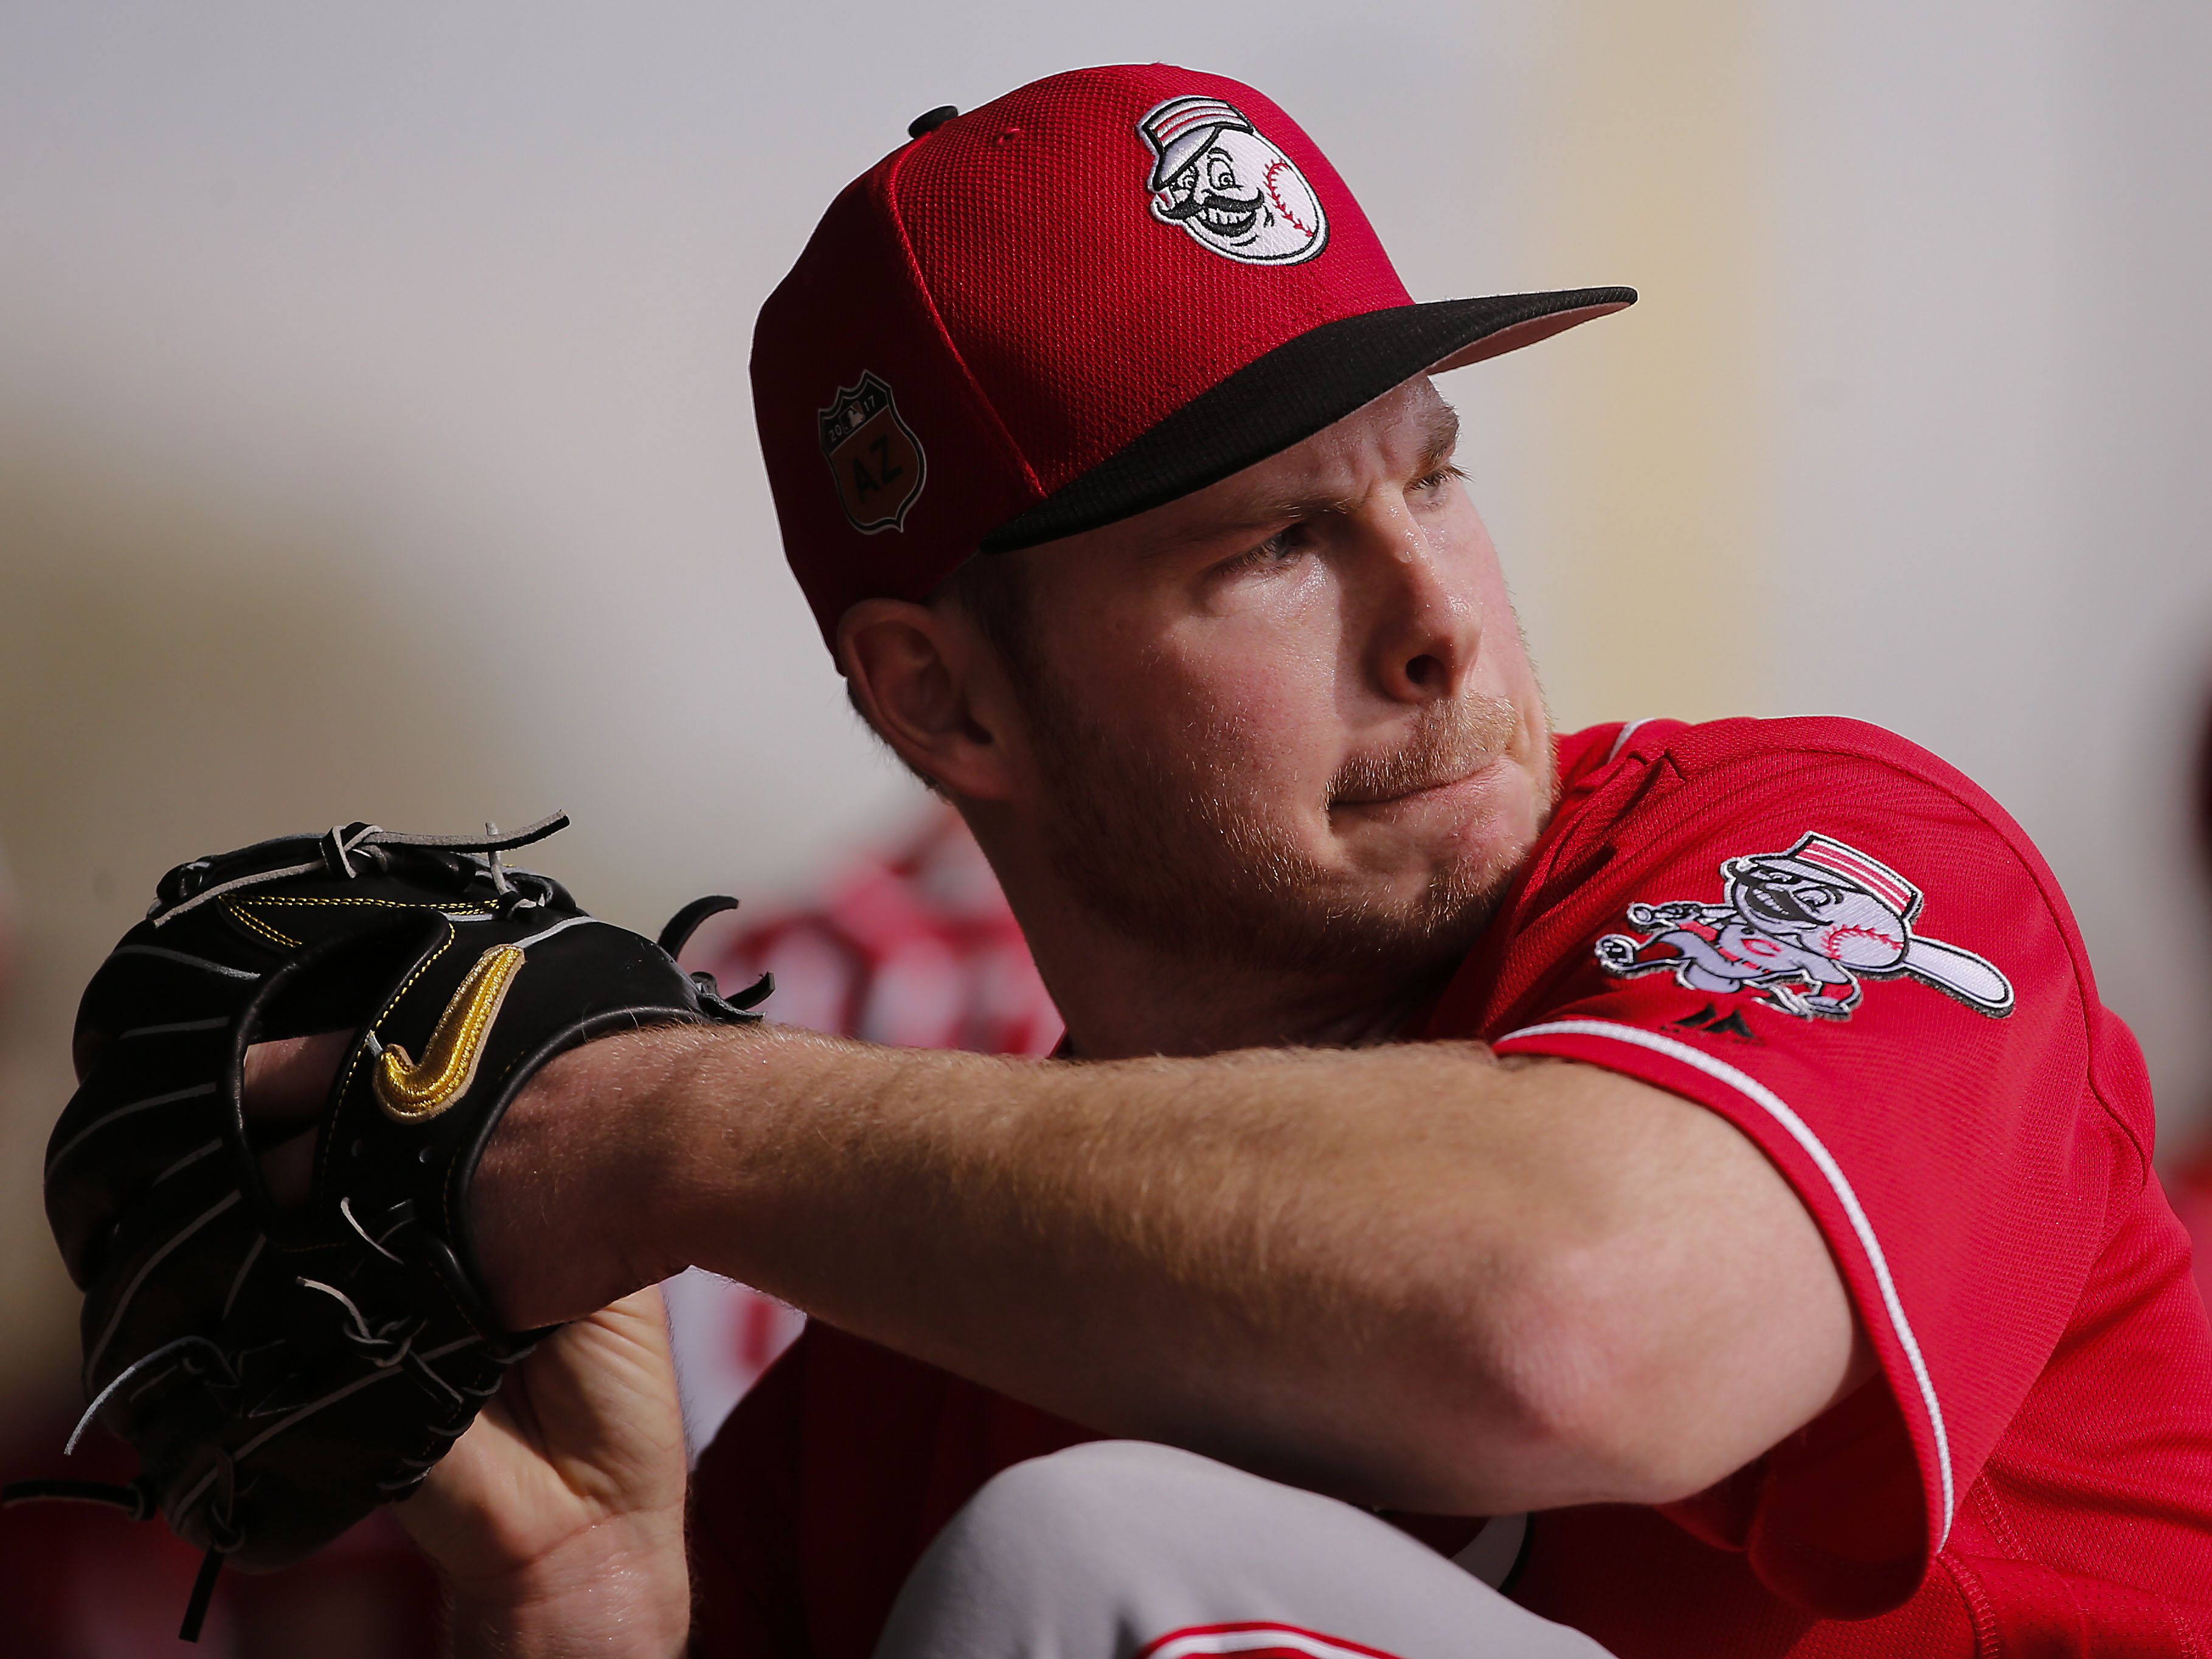 Cincinnati Reds Spring Training Preview - Is there any move that ... - My Cincinnati Reds Blog (blog)